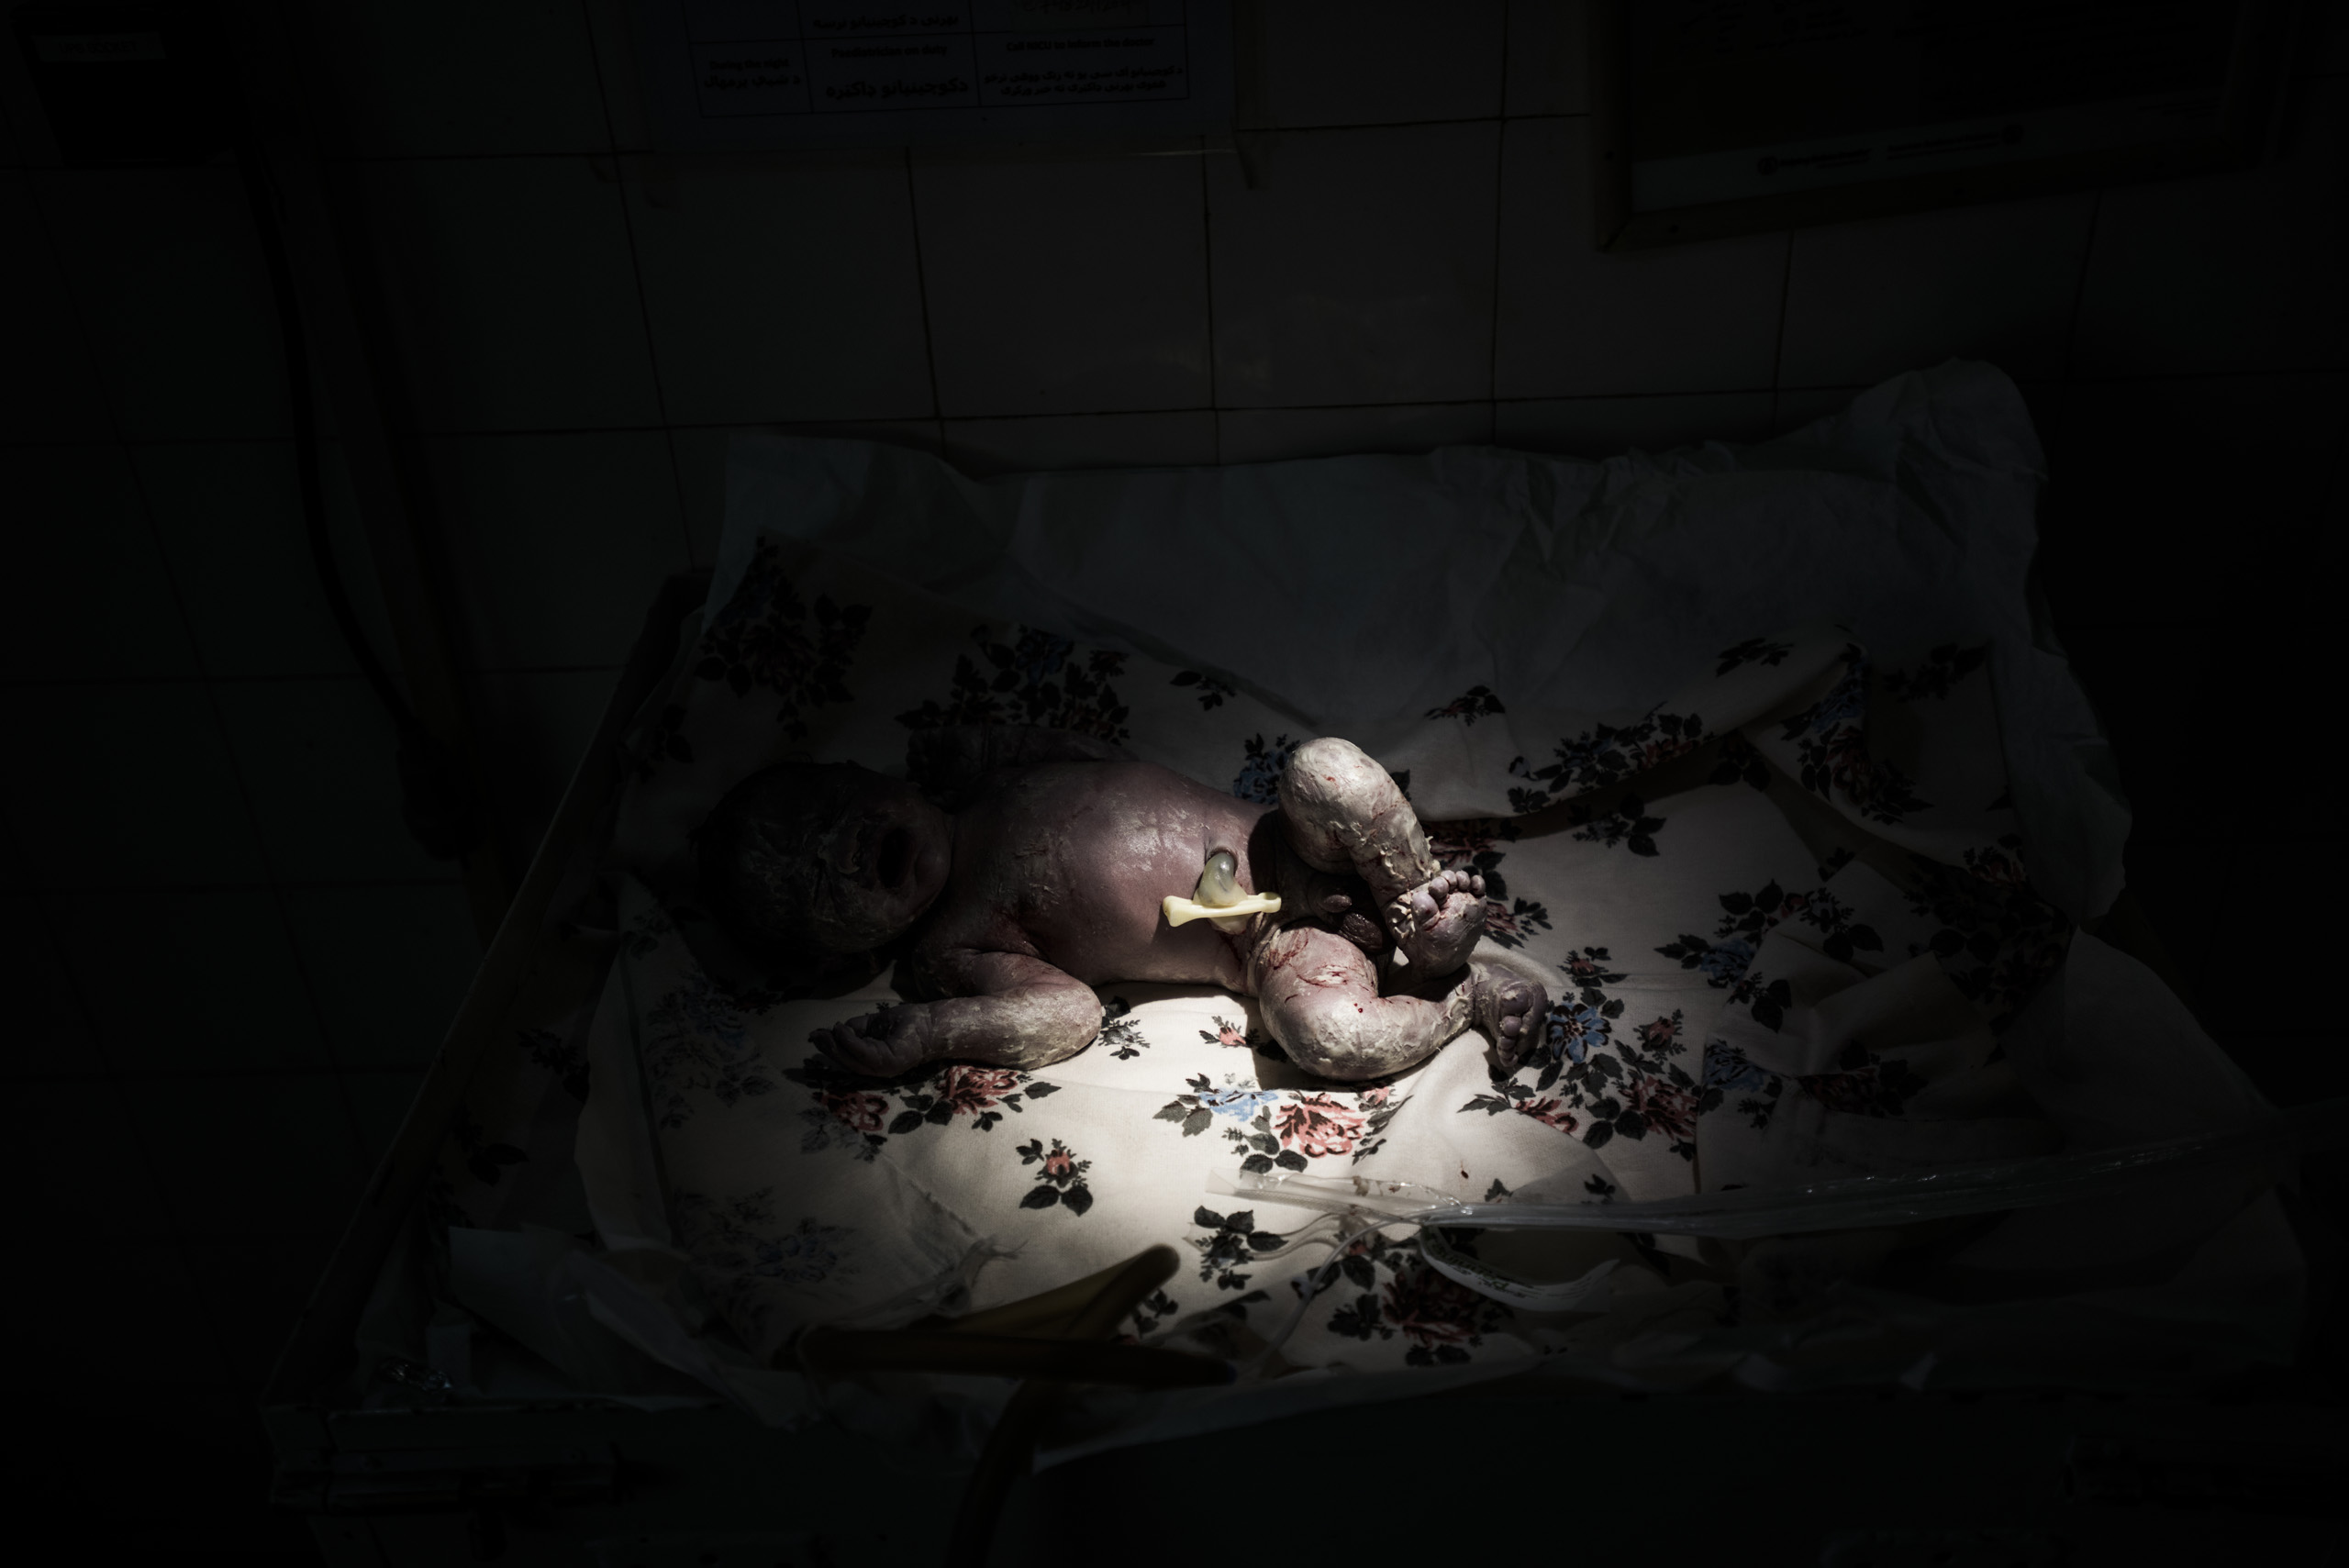 A newborn after a cesarean section in a hospital run by Doctors Without Borders, Lashkar Gah, Helmand, Afghanistan, June 2016.